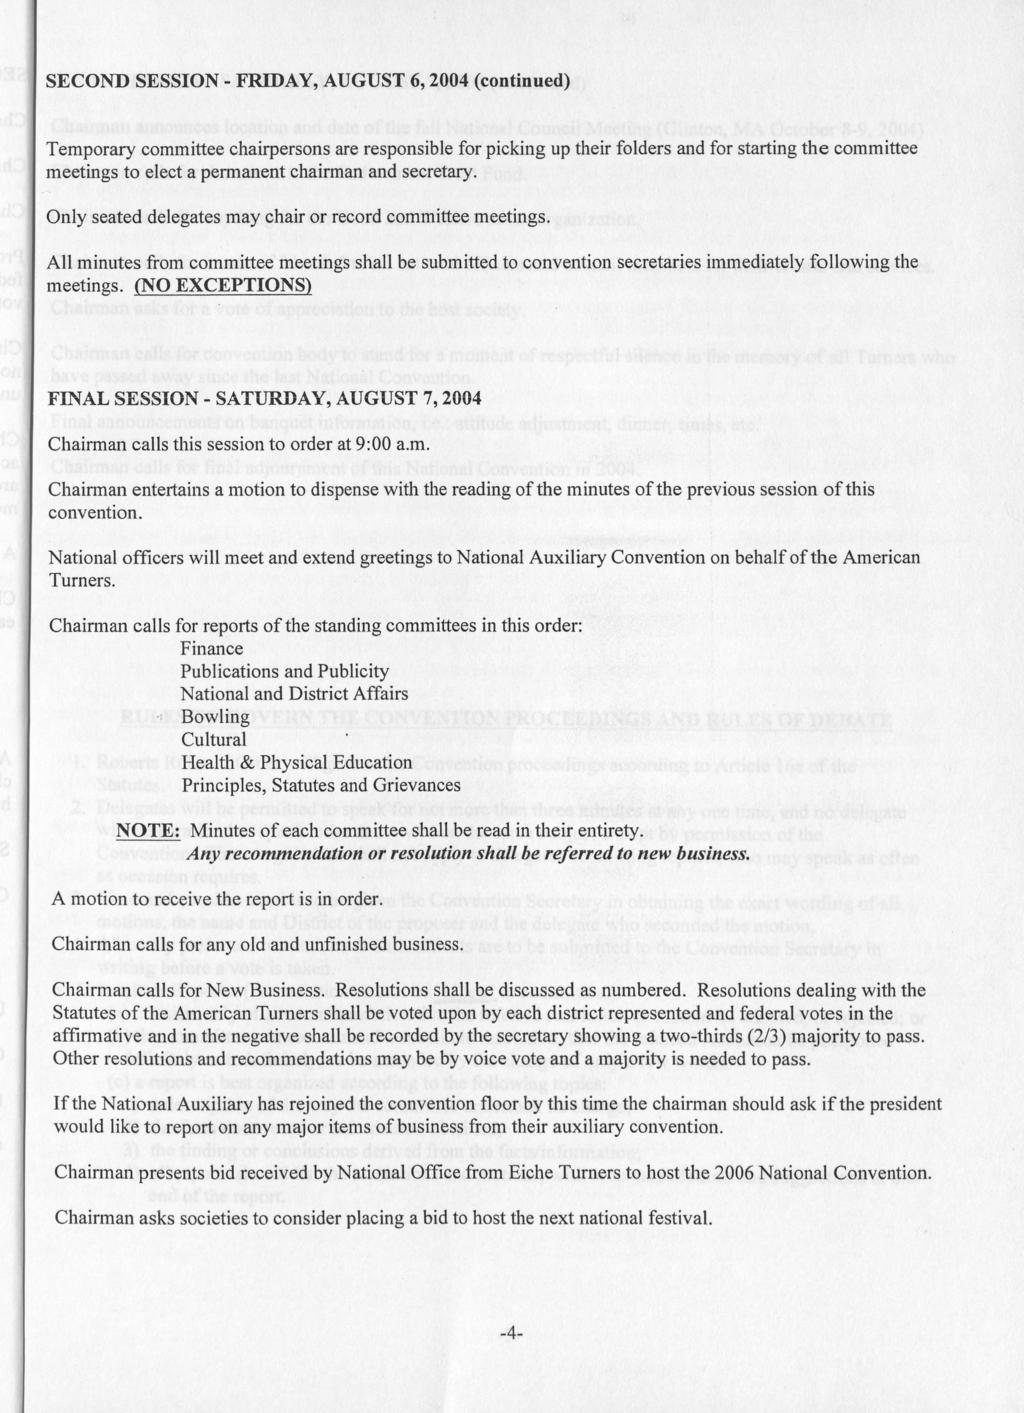 SECOND SESSION - FRIDAY, AUGUST 6, 2004 (continued) Temporary committee chairpersons are responsible for picking up their folders and for starting the committee meetings to elect a permanent chairman